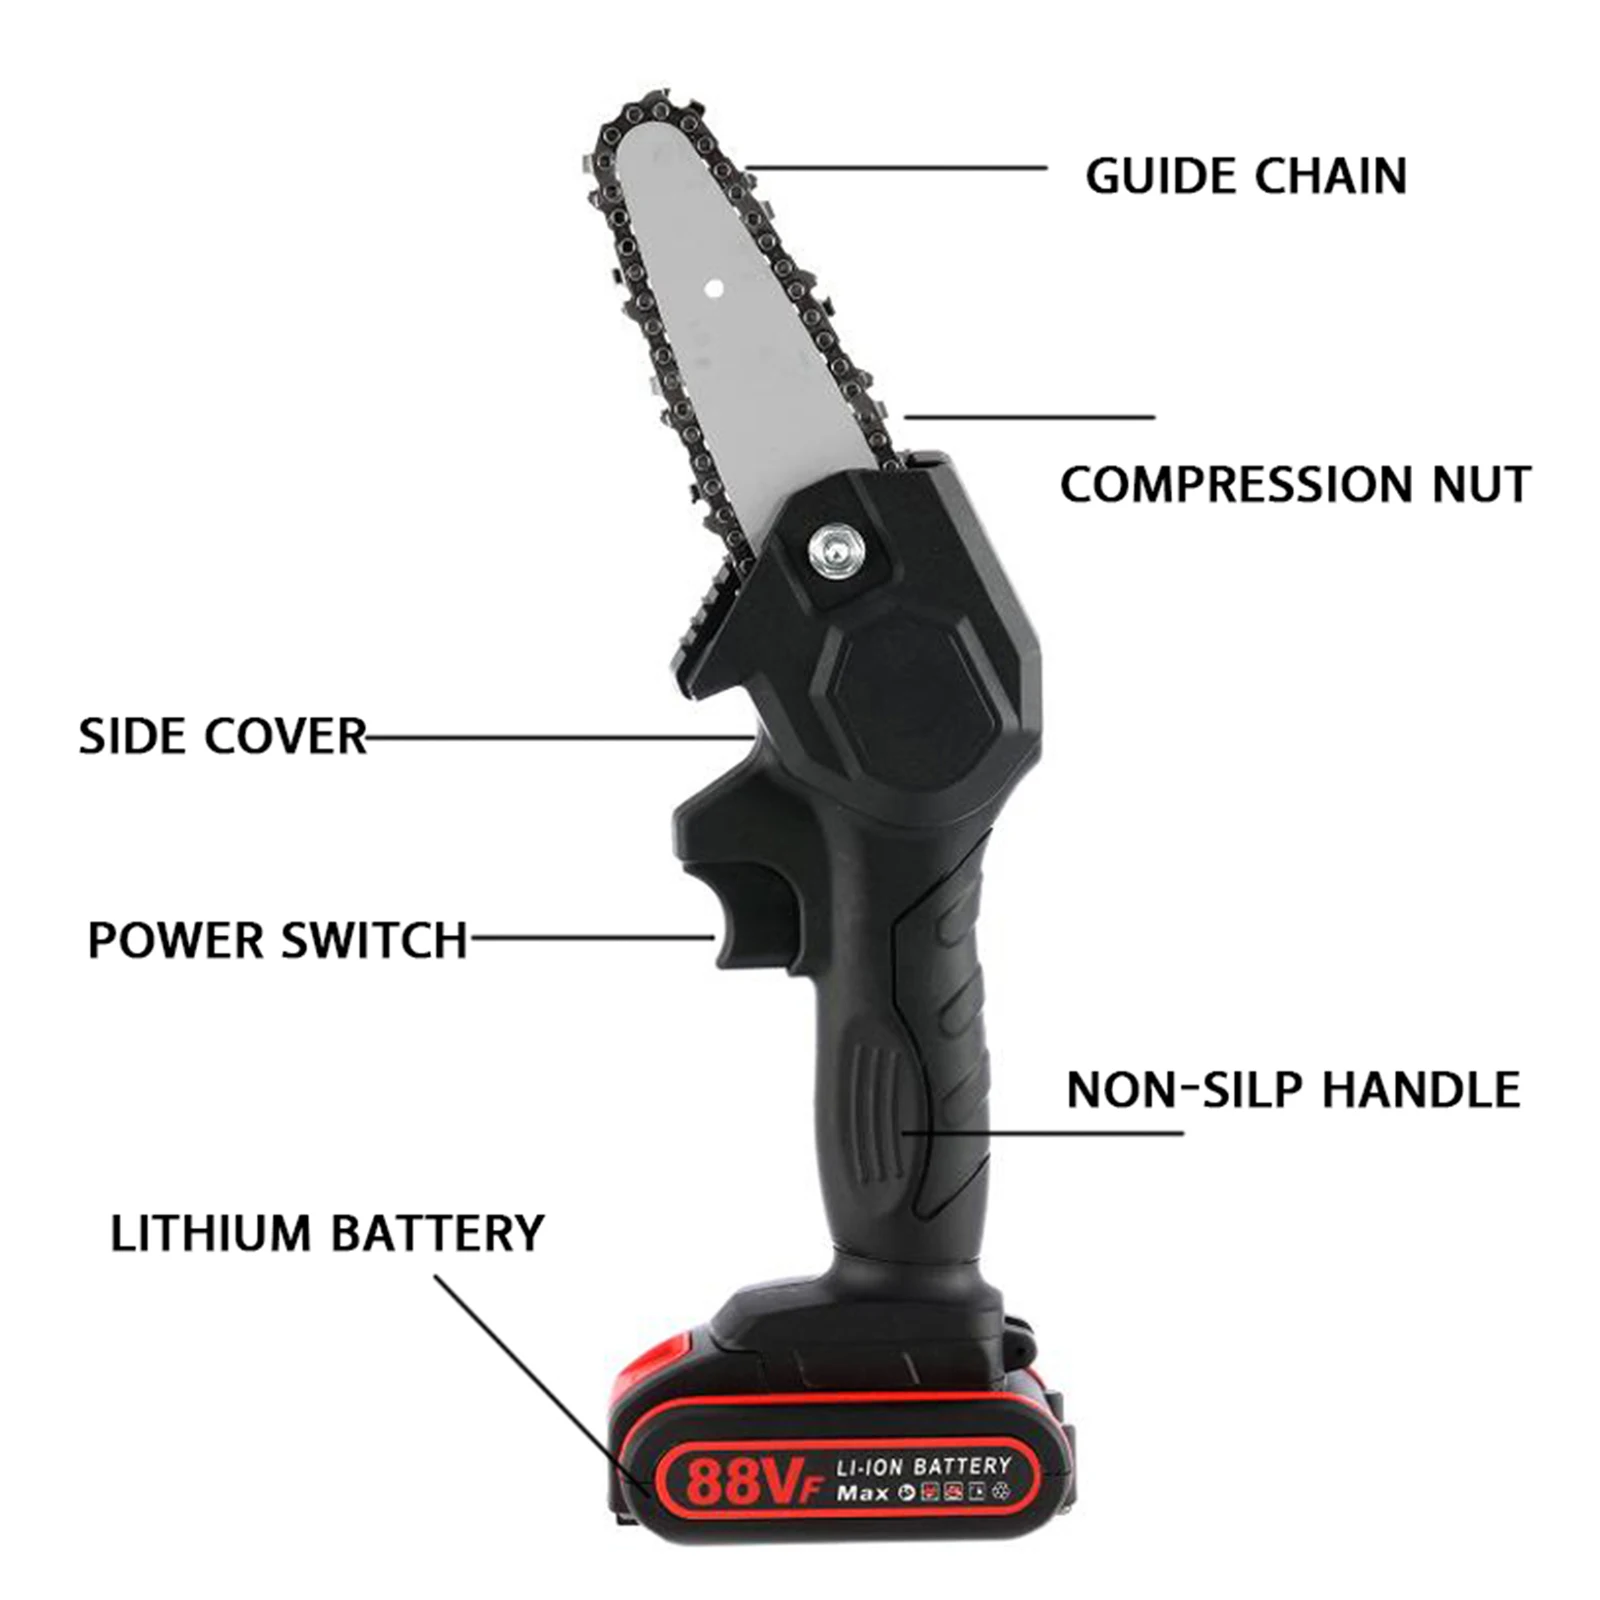 

Mini Cordless Electric Chainsaw, 6-Inch 88V 1200W Handheld Saw Pruning Shears Chainsaw Wood Cutting Chainsaw Chains Tools